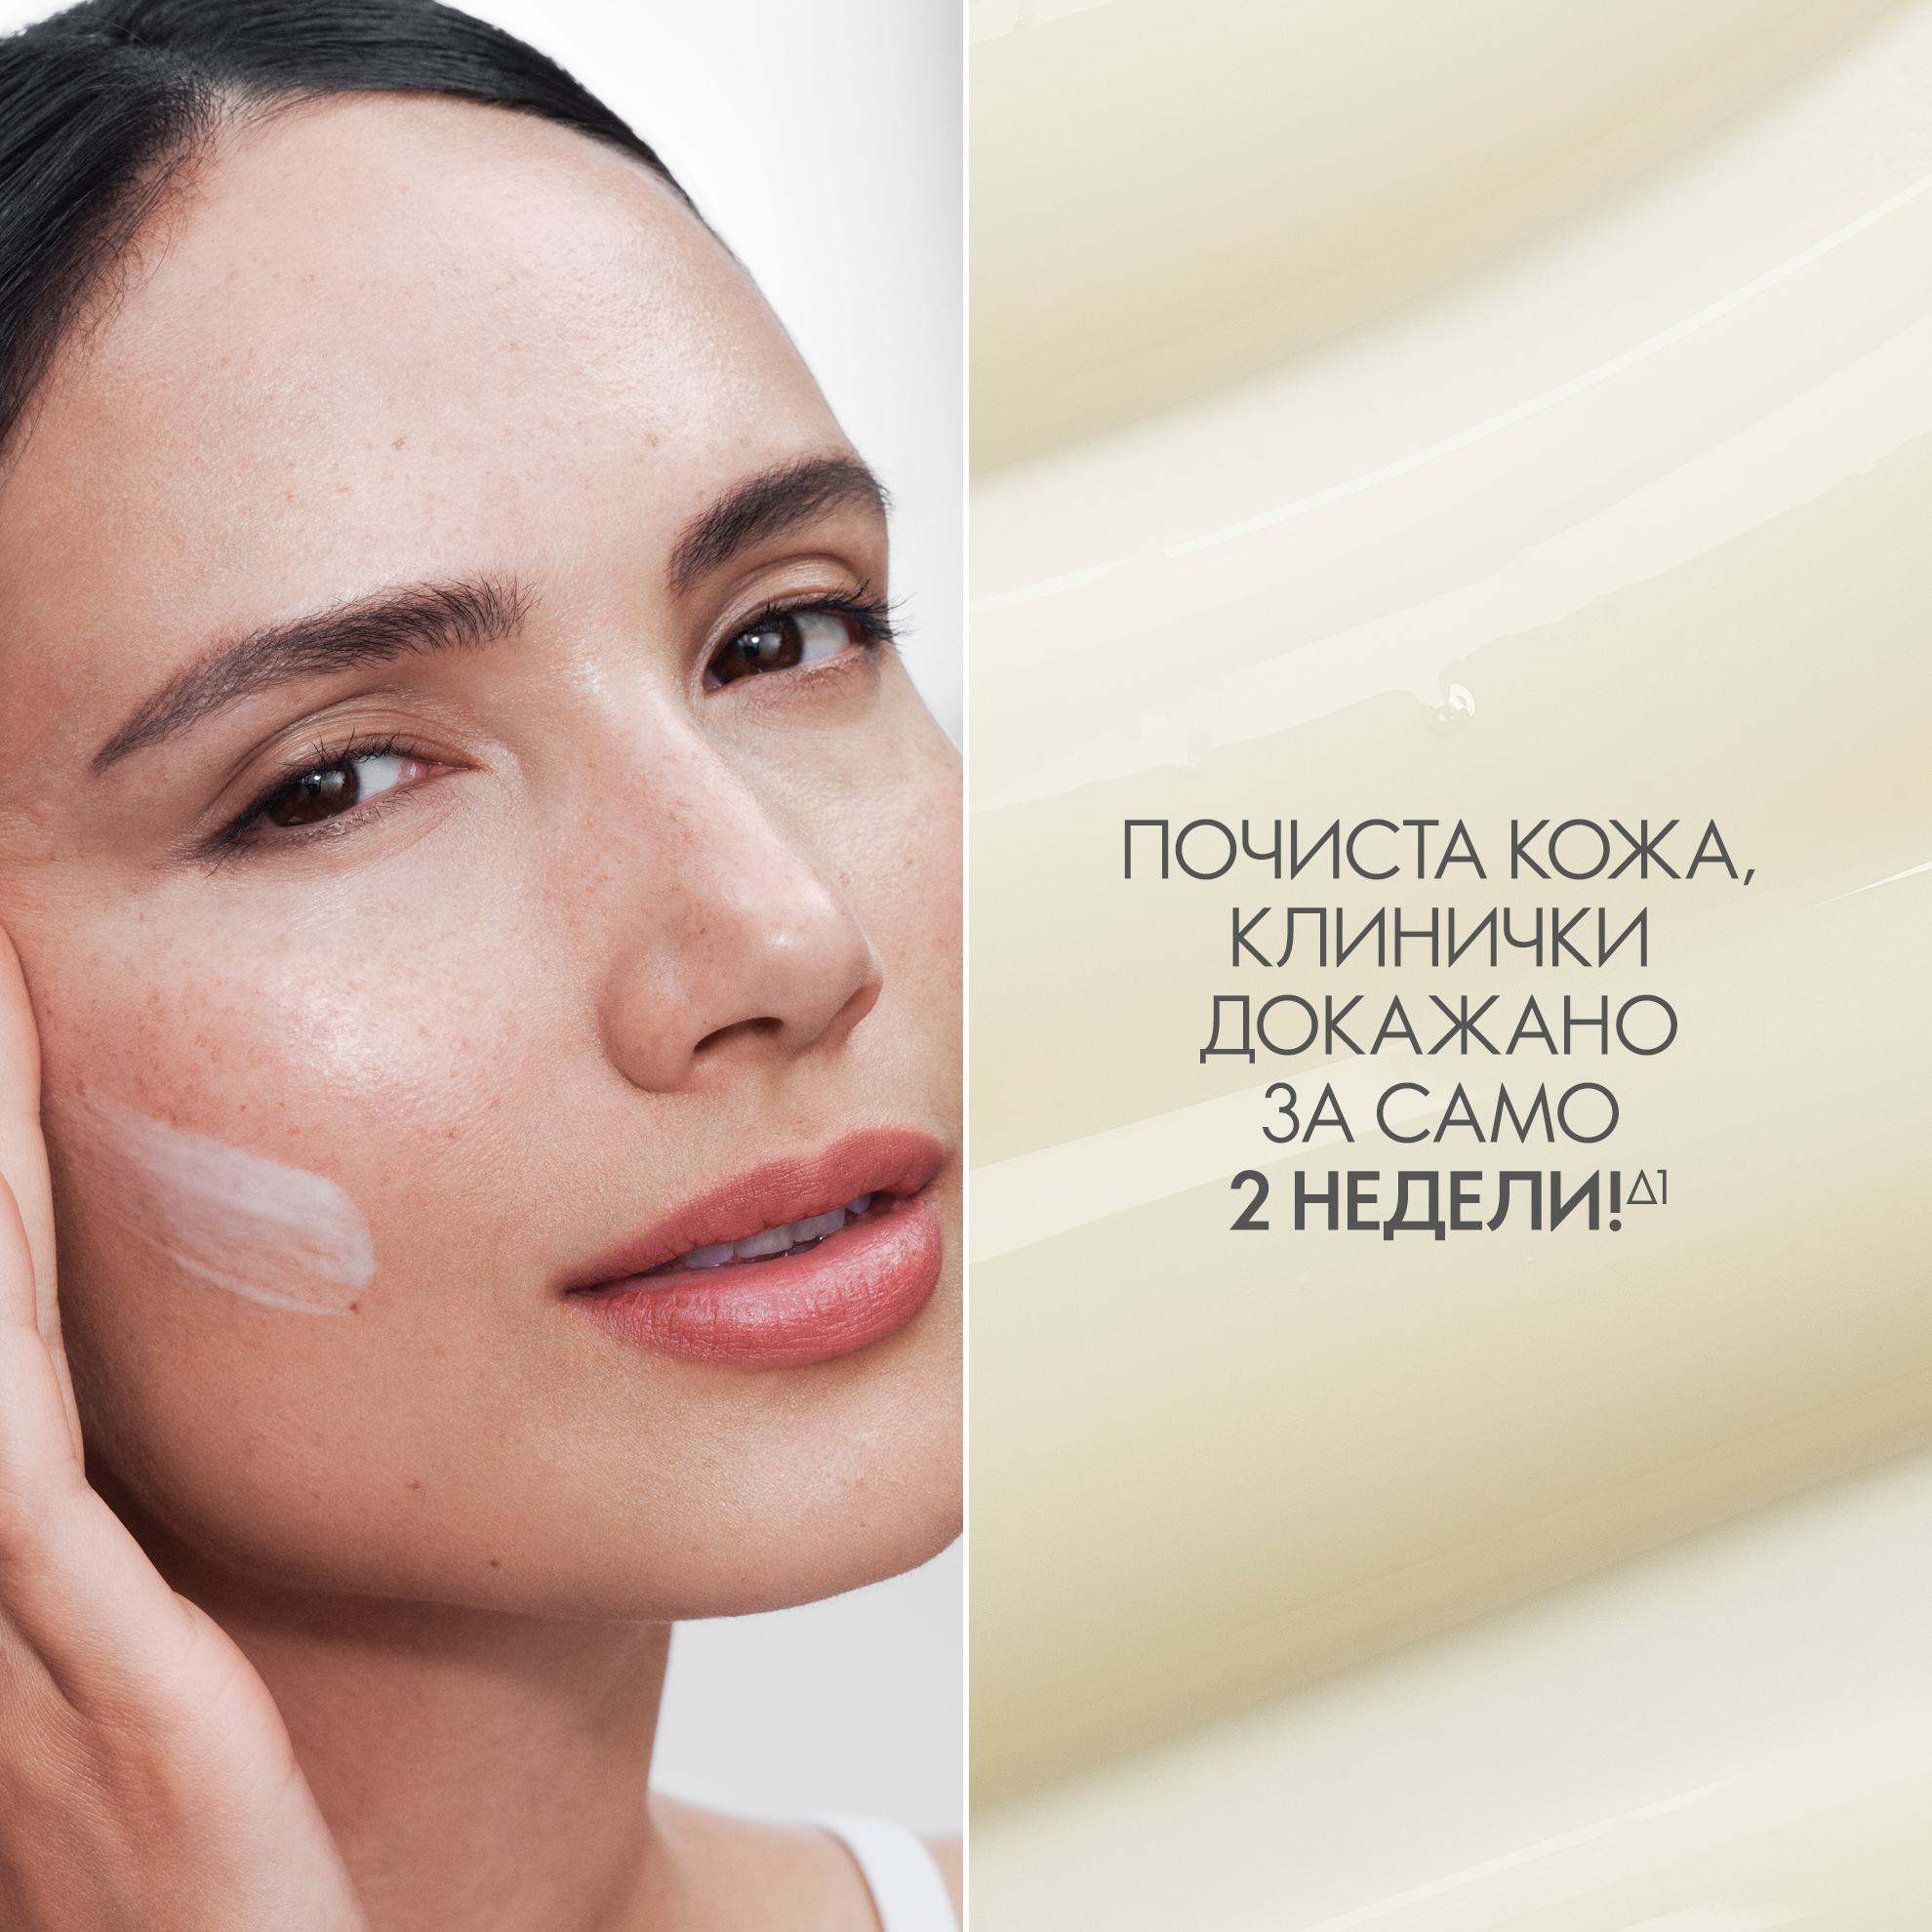 https://media-cdn.oriflame.com/productImage?externalMediaId=product-management-media%2fProducts%2f45608%2fMK%2f45608_2.png&id=17553001&version=2